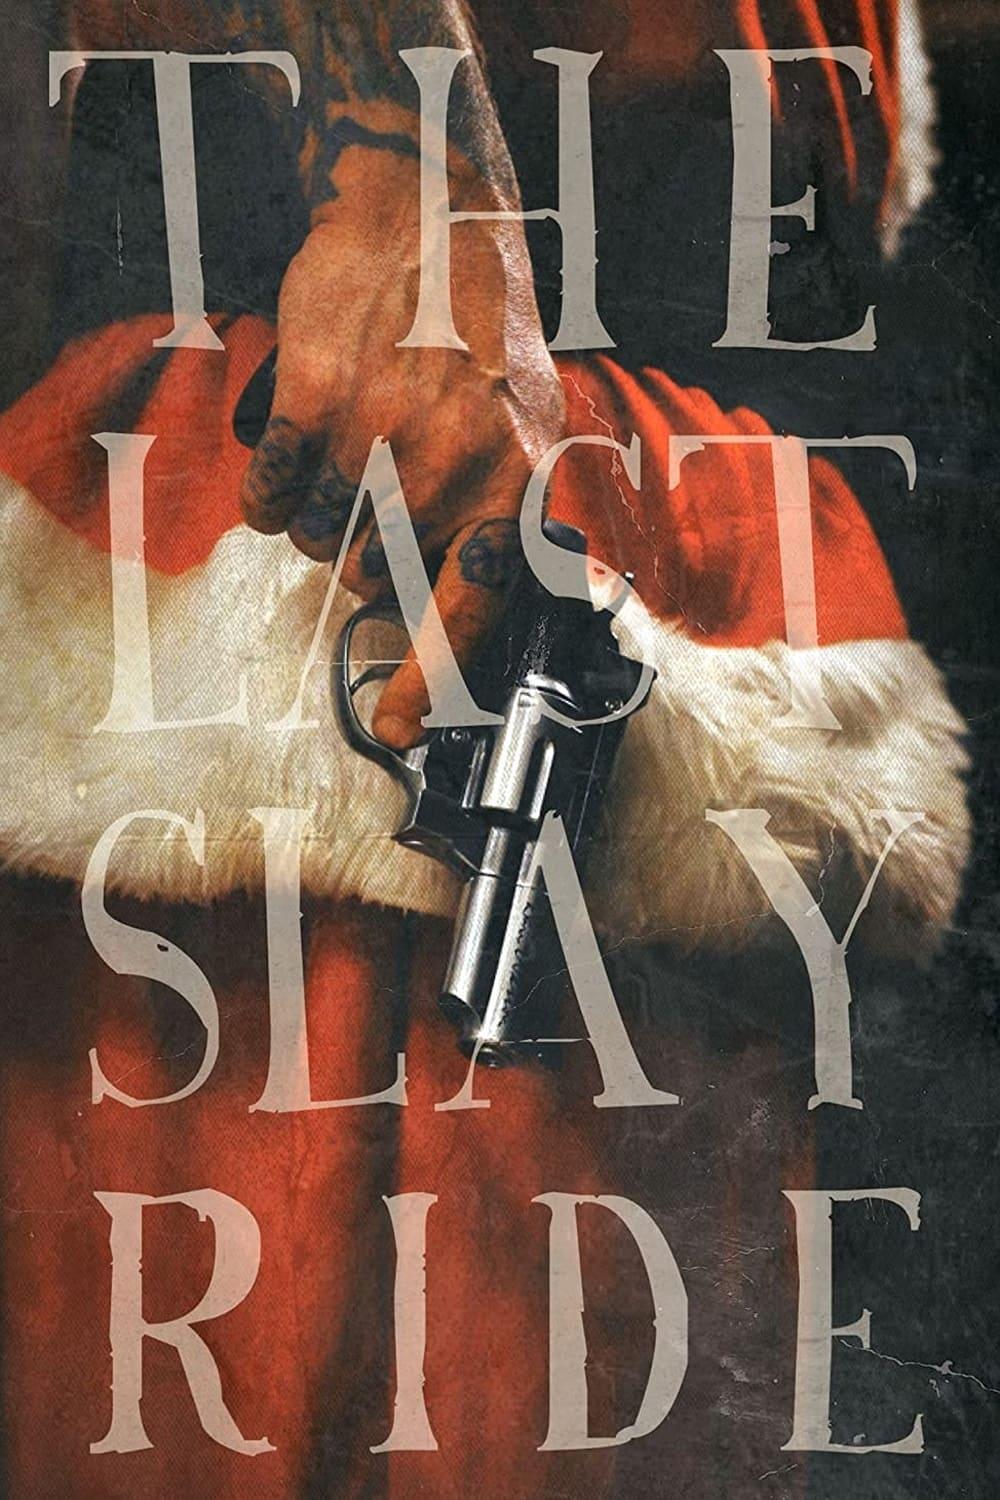 The Last Slay Ride poster